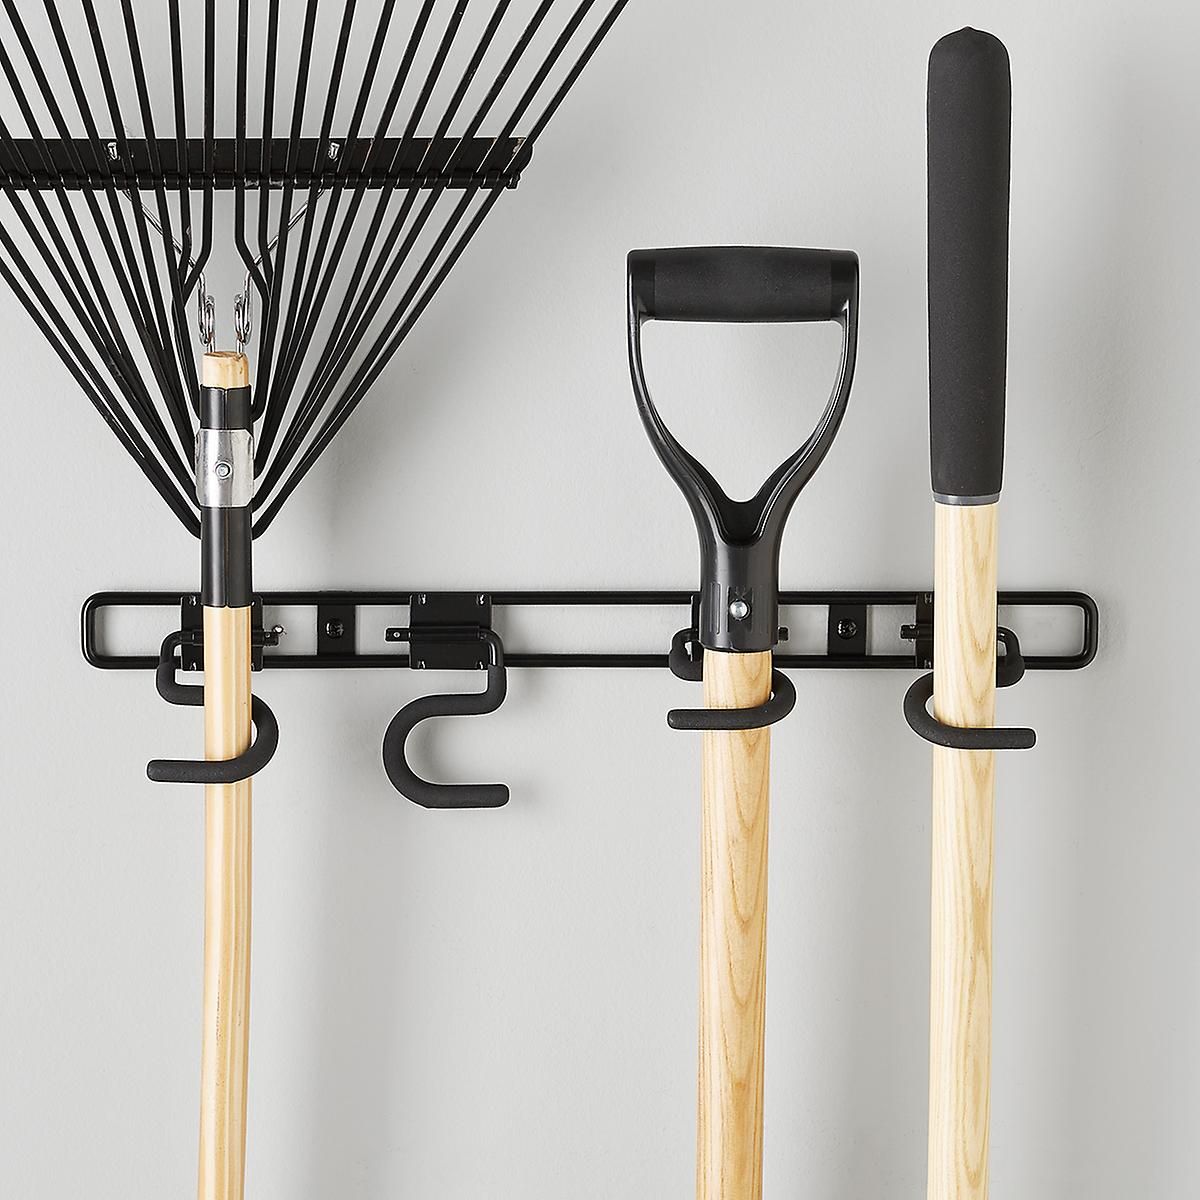 Black S Hook Rack | The Container Store